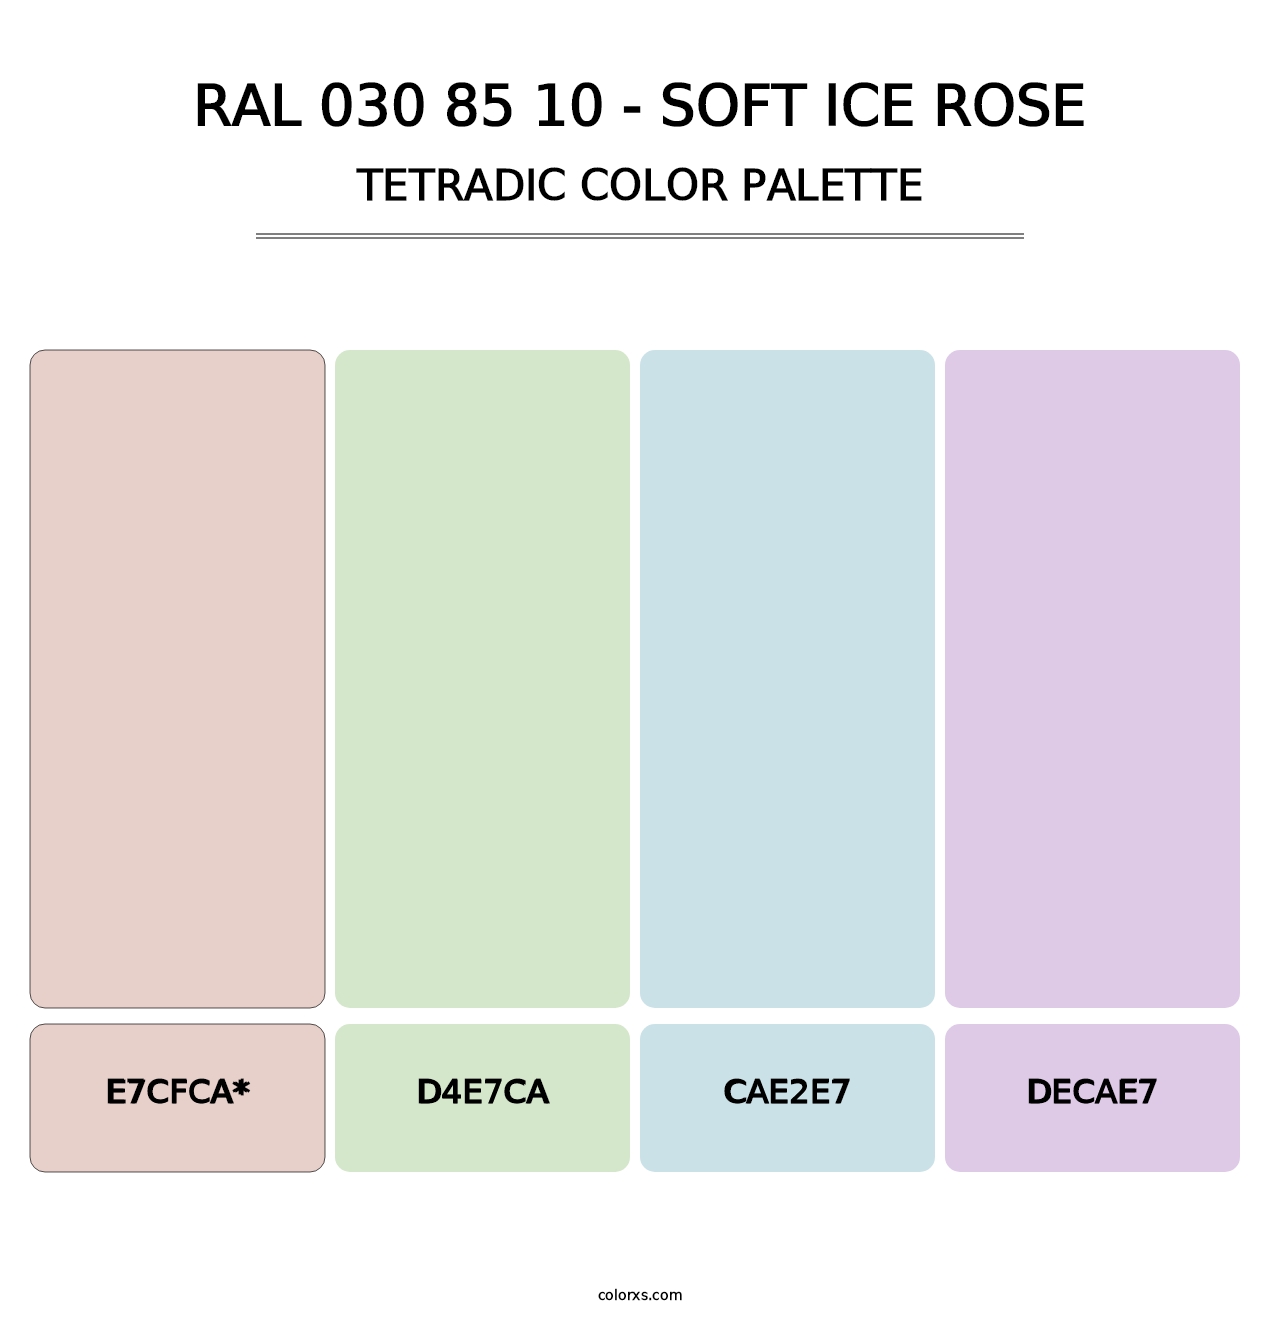 RAL 030 85 10 - Soft Ice Rose - Tetradic Color Palette